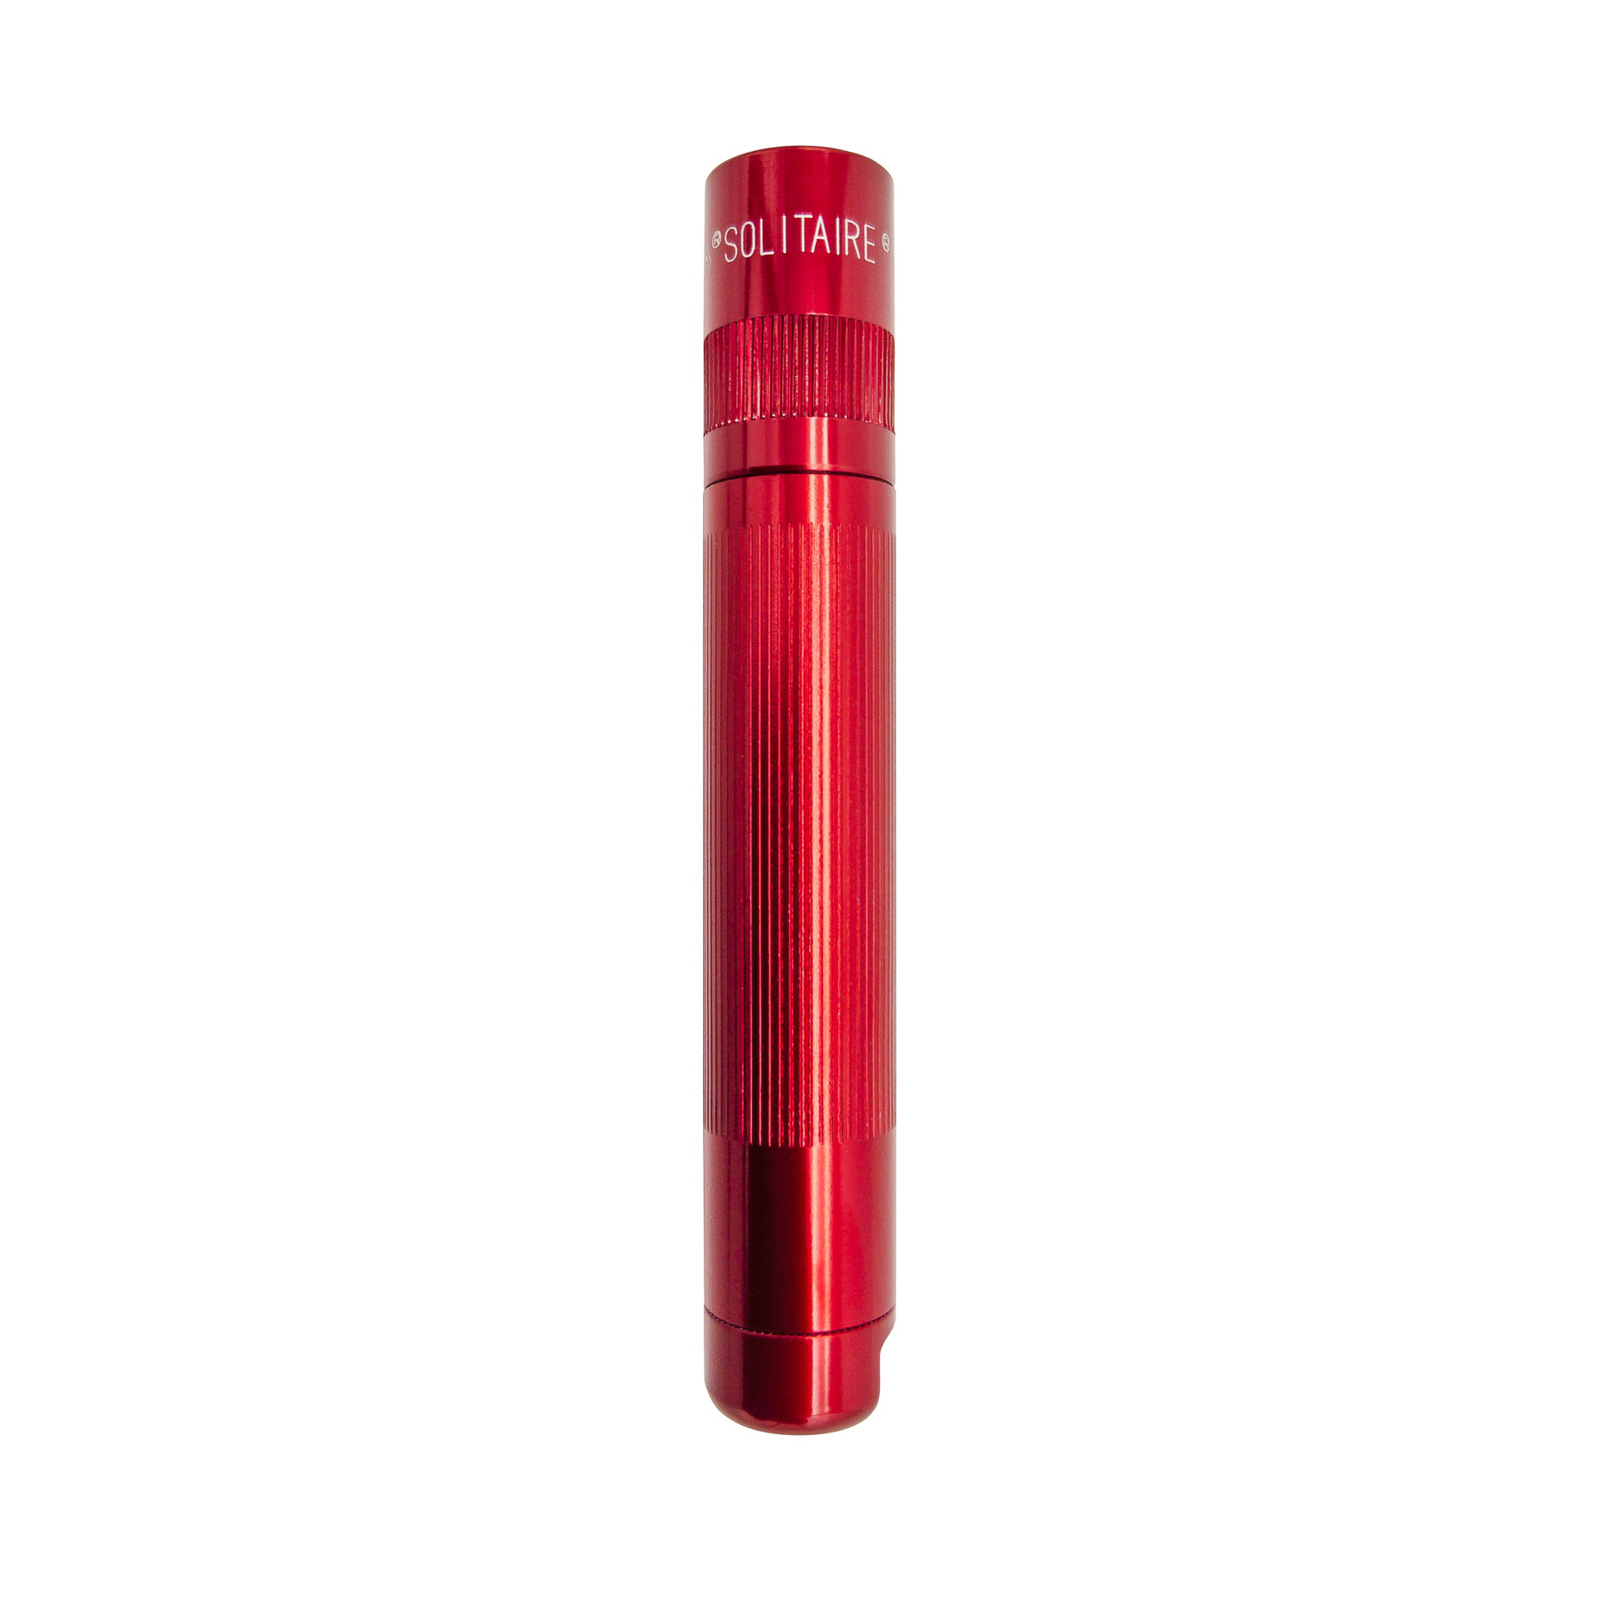 Maglite zaklamp Solitaire 1 Cell AAA, box, rood